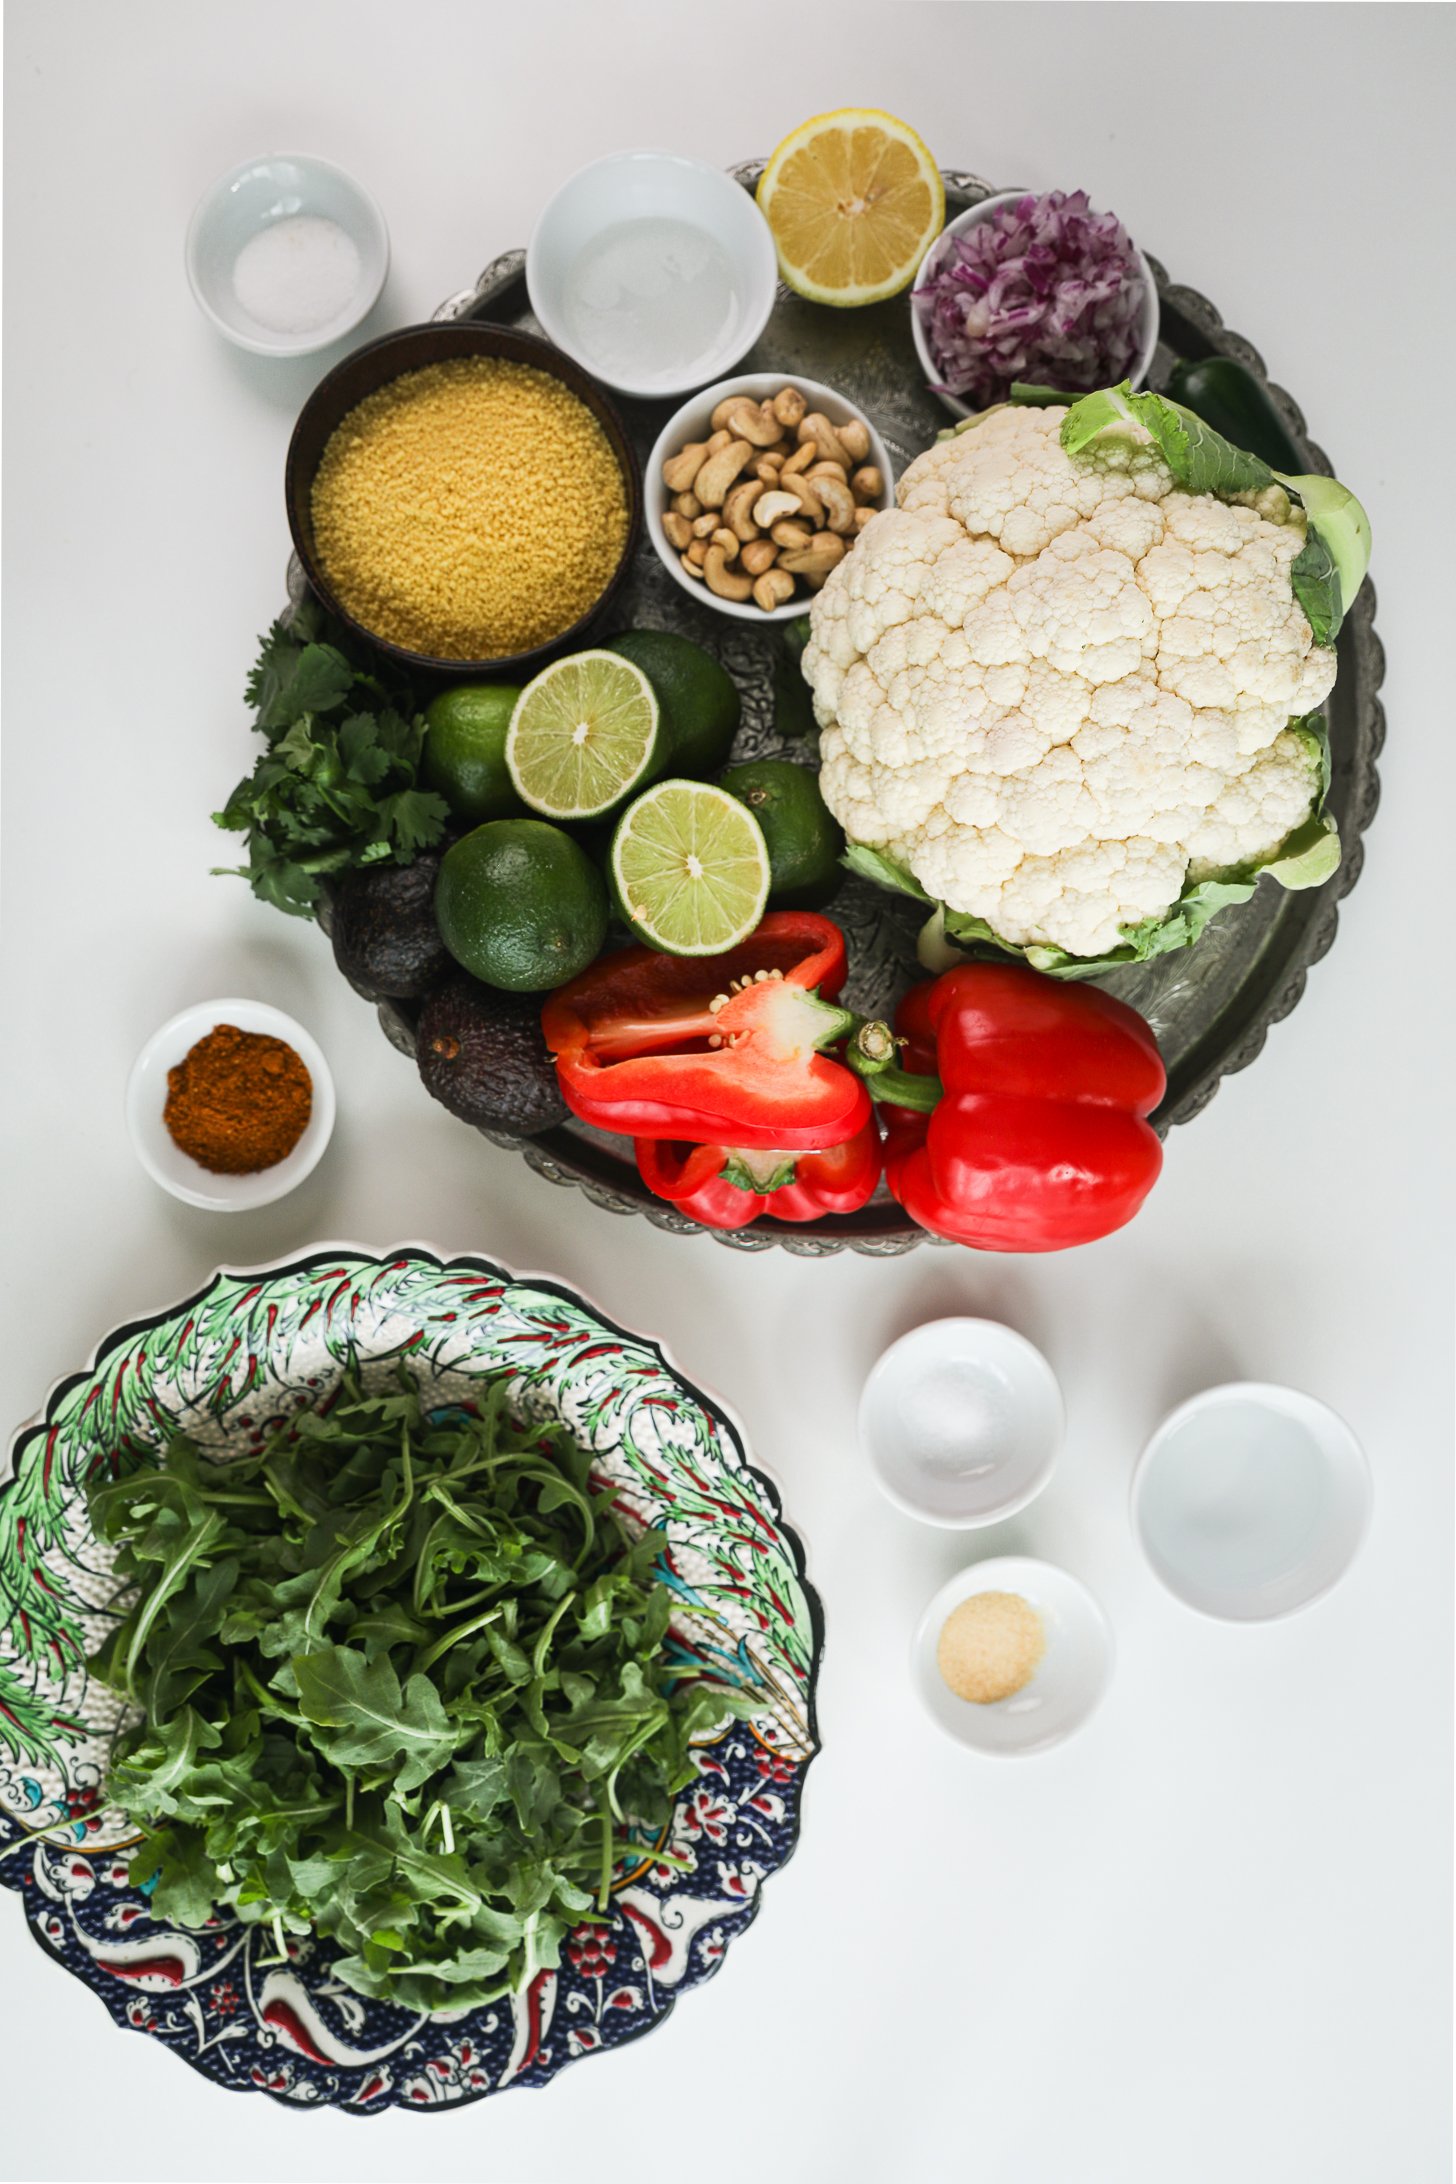 Overhead image of a food display including vegetables, arugula, spices, cashews and couscous.